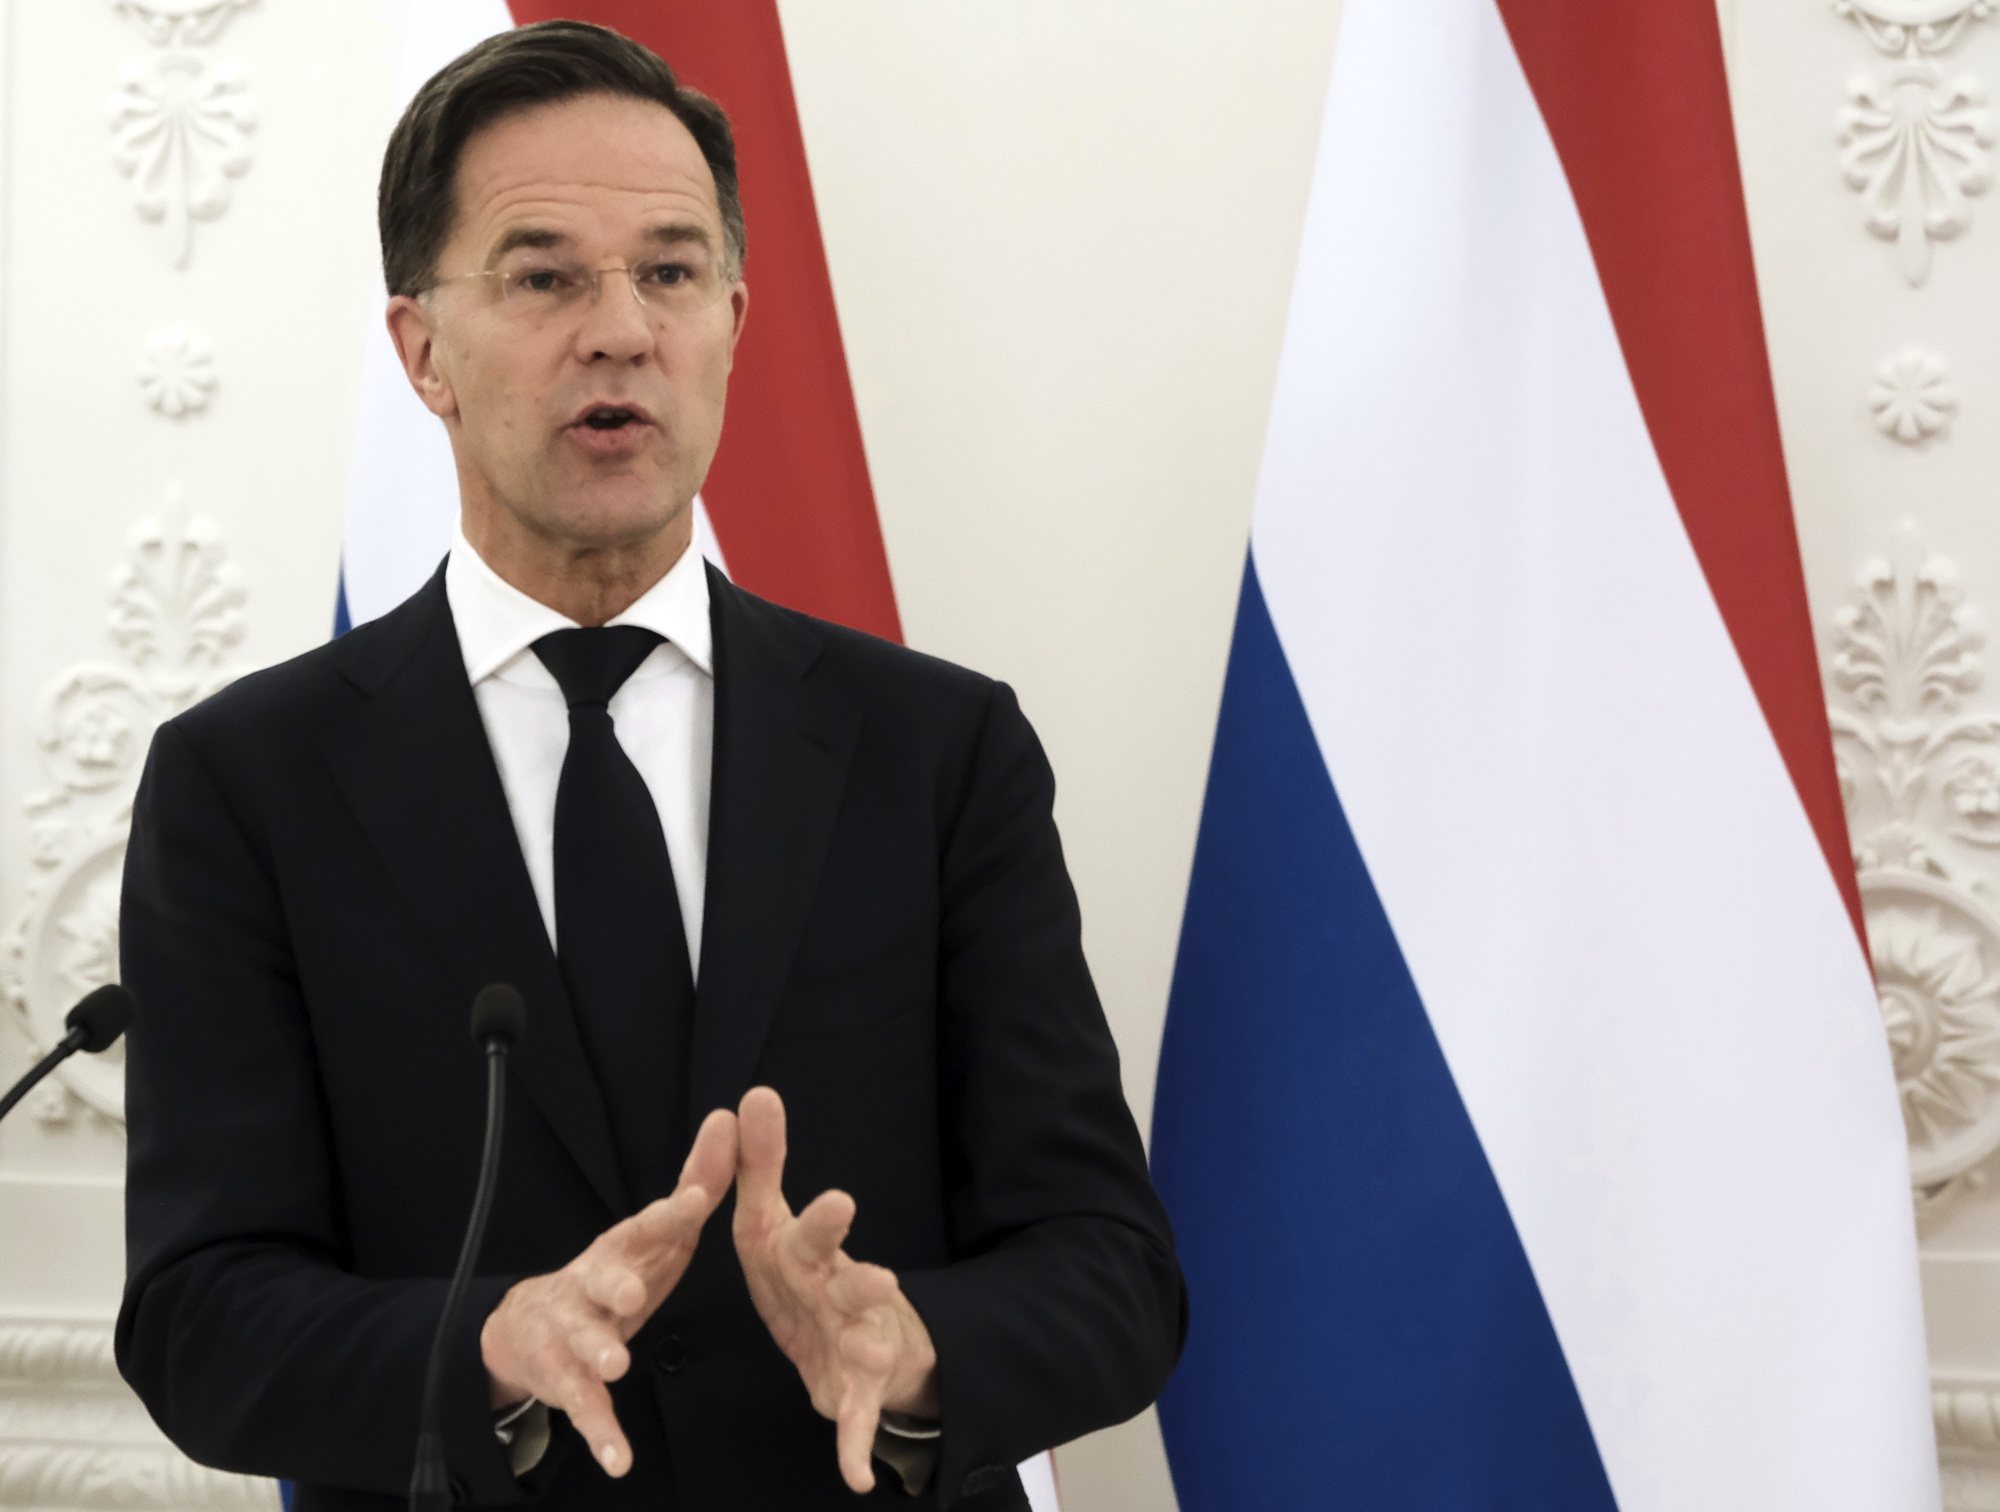 epa11255631 Dutch Prime Minister Mark Rutte attends a press conference after his meeting with the Lithuanian president in Vilnius, Lithuania, 02 April 2024. The Lithuanian president and the Dutch prime minister during the meeting discussed defense and security, the strengthening of NATOÃ•s eastern flank, support for Ukraine, and current EU issues.  EPA/VALDA KALNINA